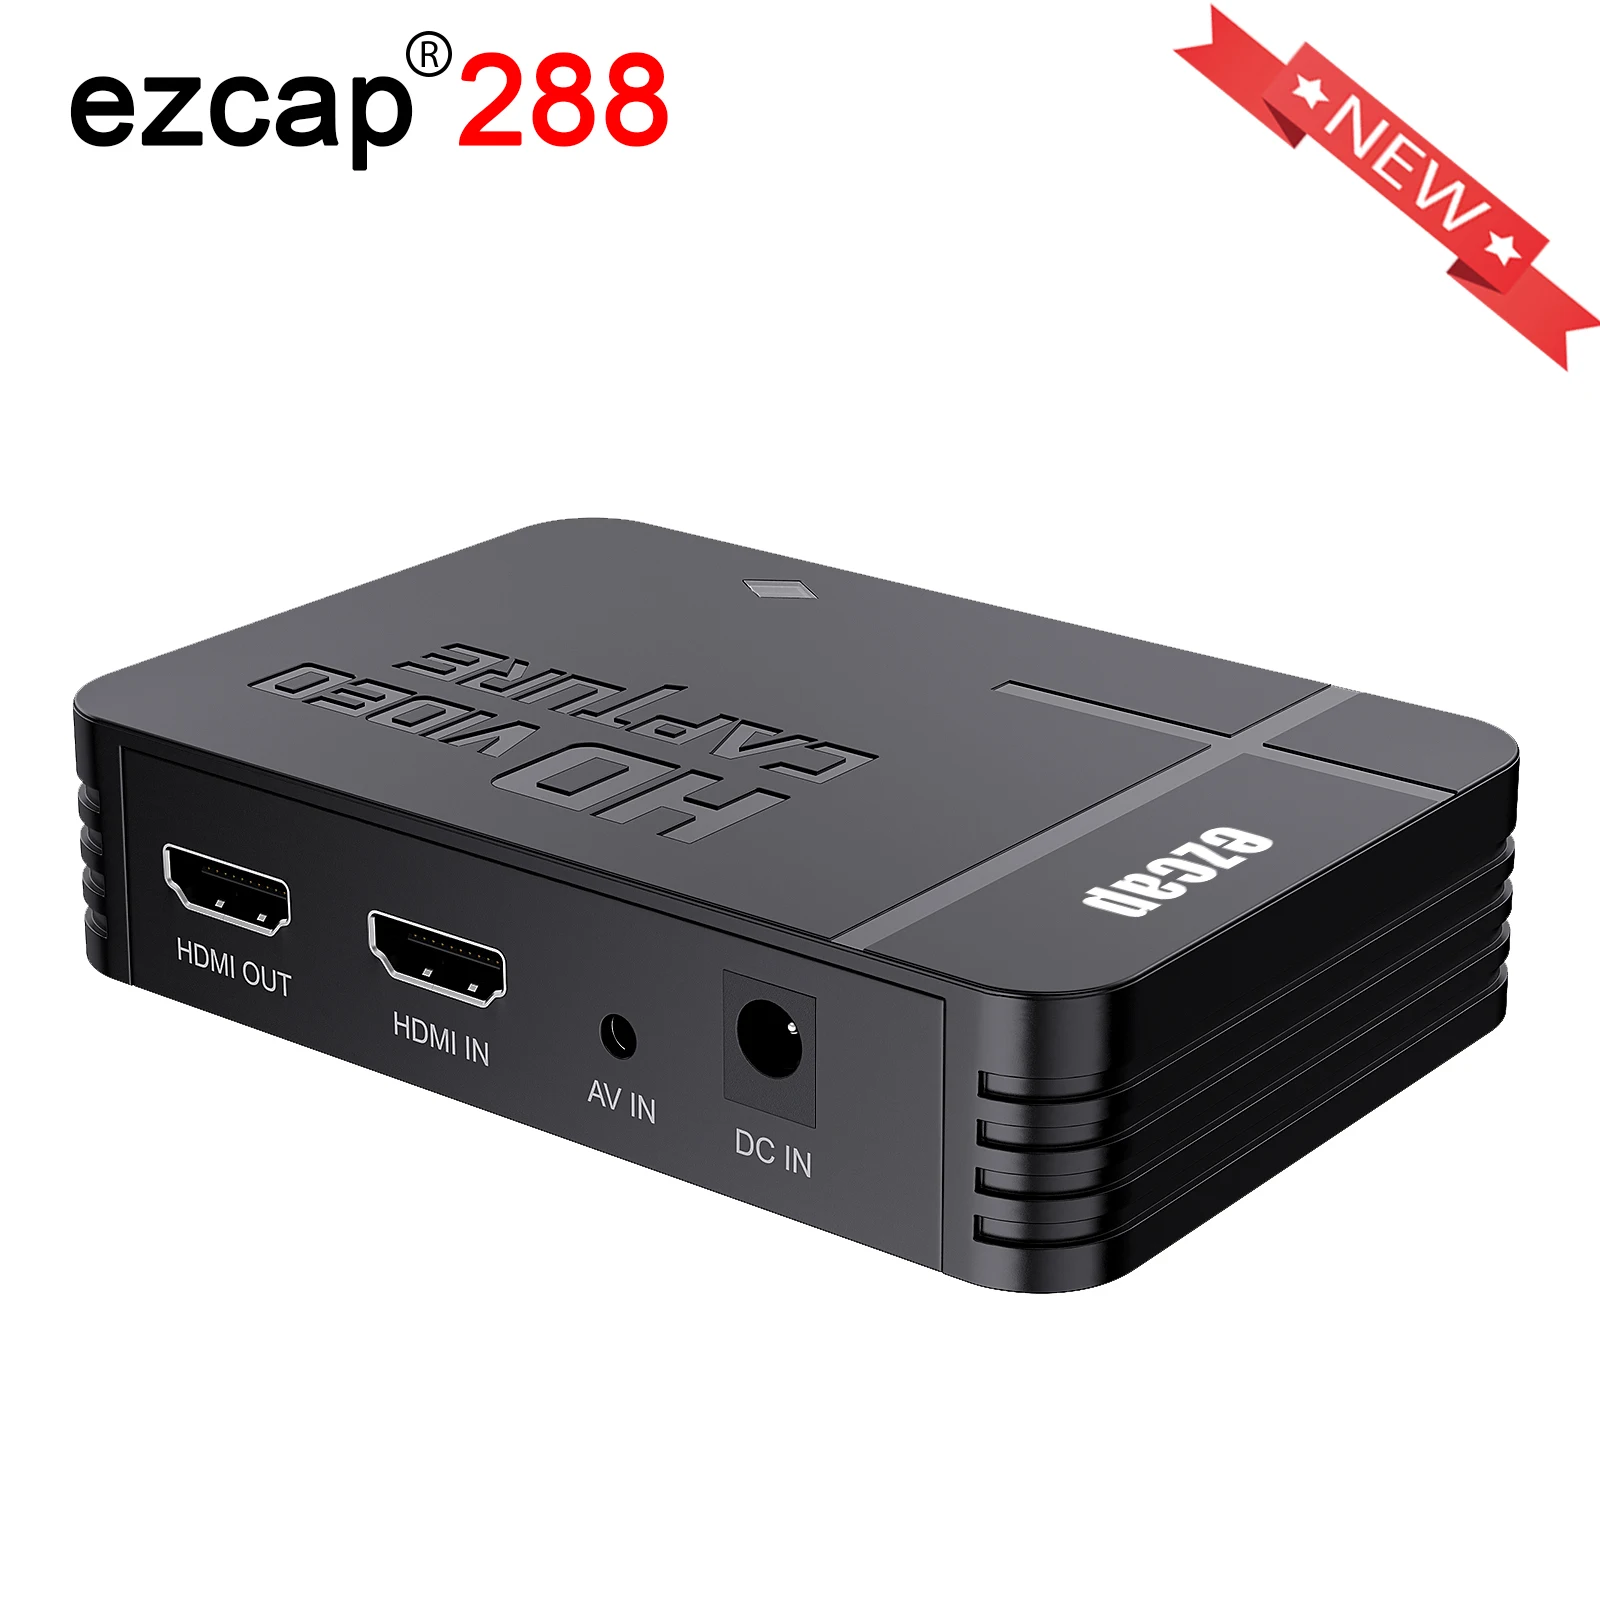 Y&H HDMI AV Video Capture Card,Analog Video Audio to Digital Conversion-Video Record Save to USB Device,No PC Required ezcap288